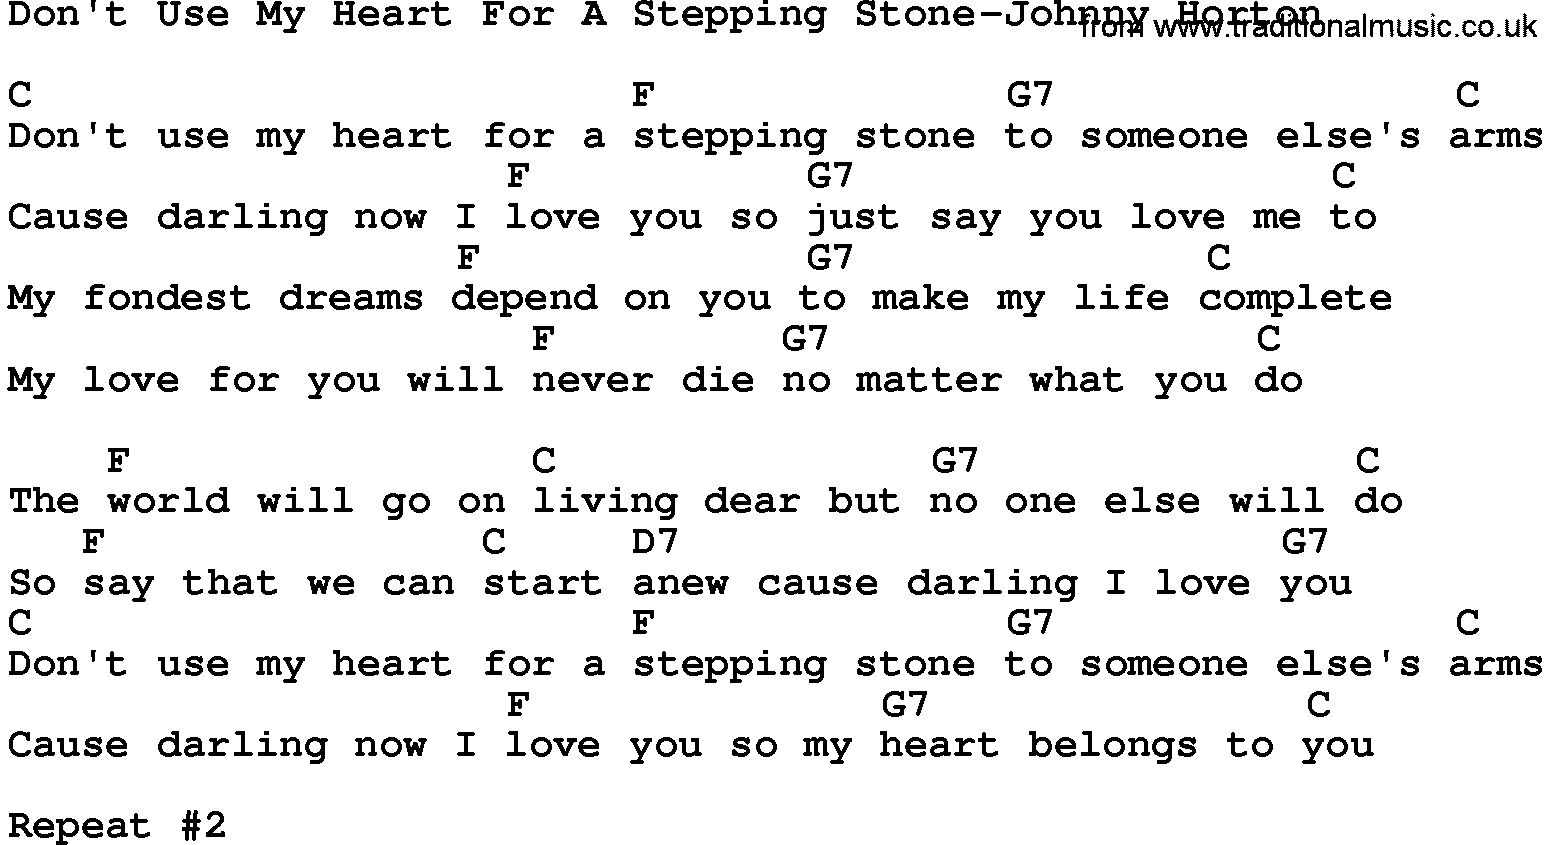 Country music song: Don't Use My Heart For A Stepping Stone-Johnny Horton lyrics and chords